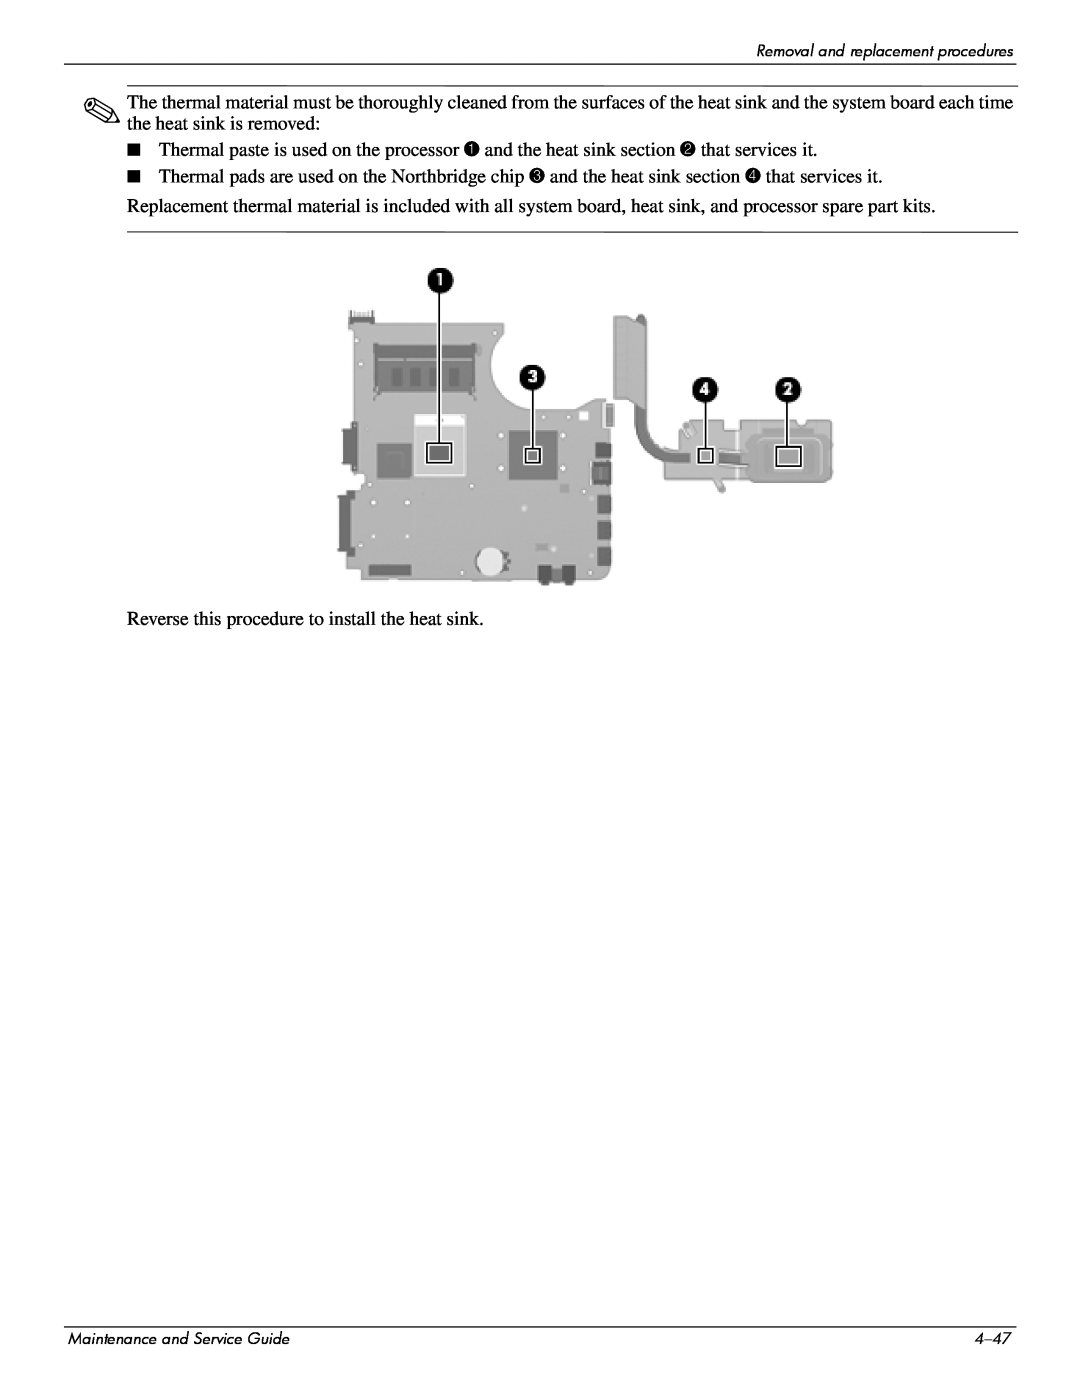 Compaq 511, 510, 515 manual Reverse this procedure to install the heat sink 